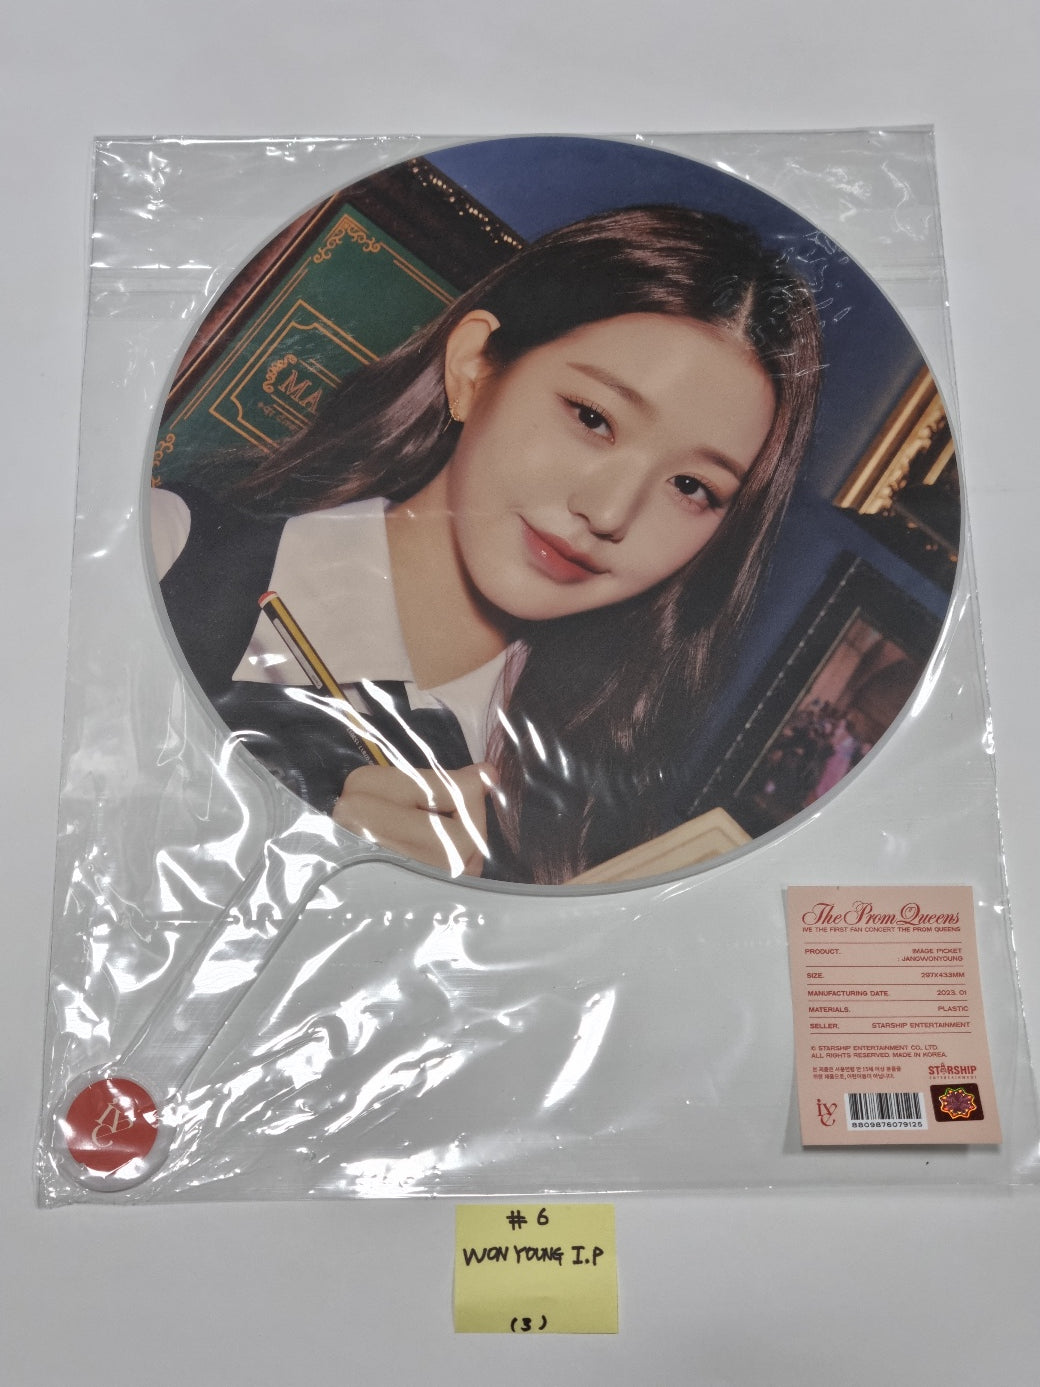 IVE "The Prom Queens" 1st Fan-Concert - Official MD [Light stick,Photo Slogan, Image Picket]